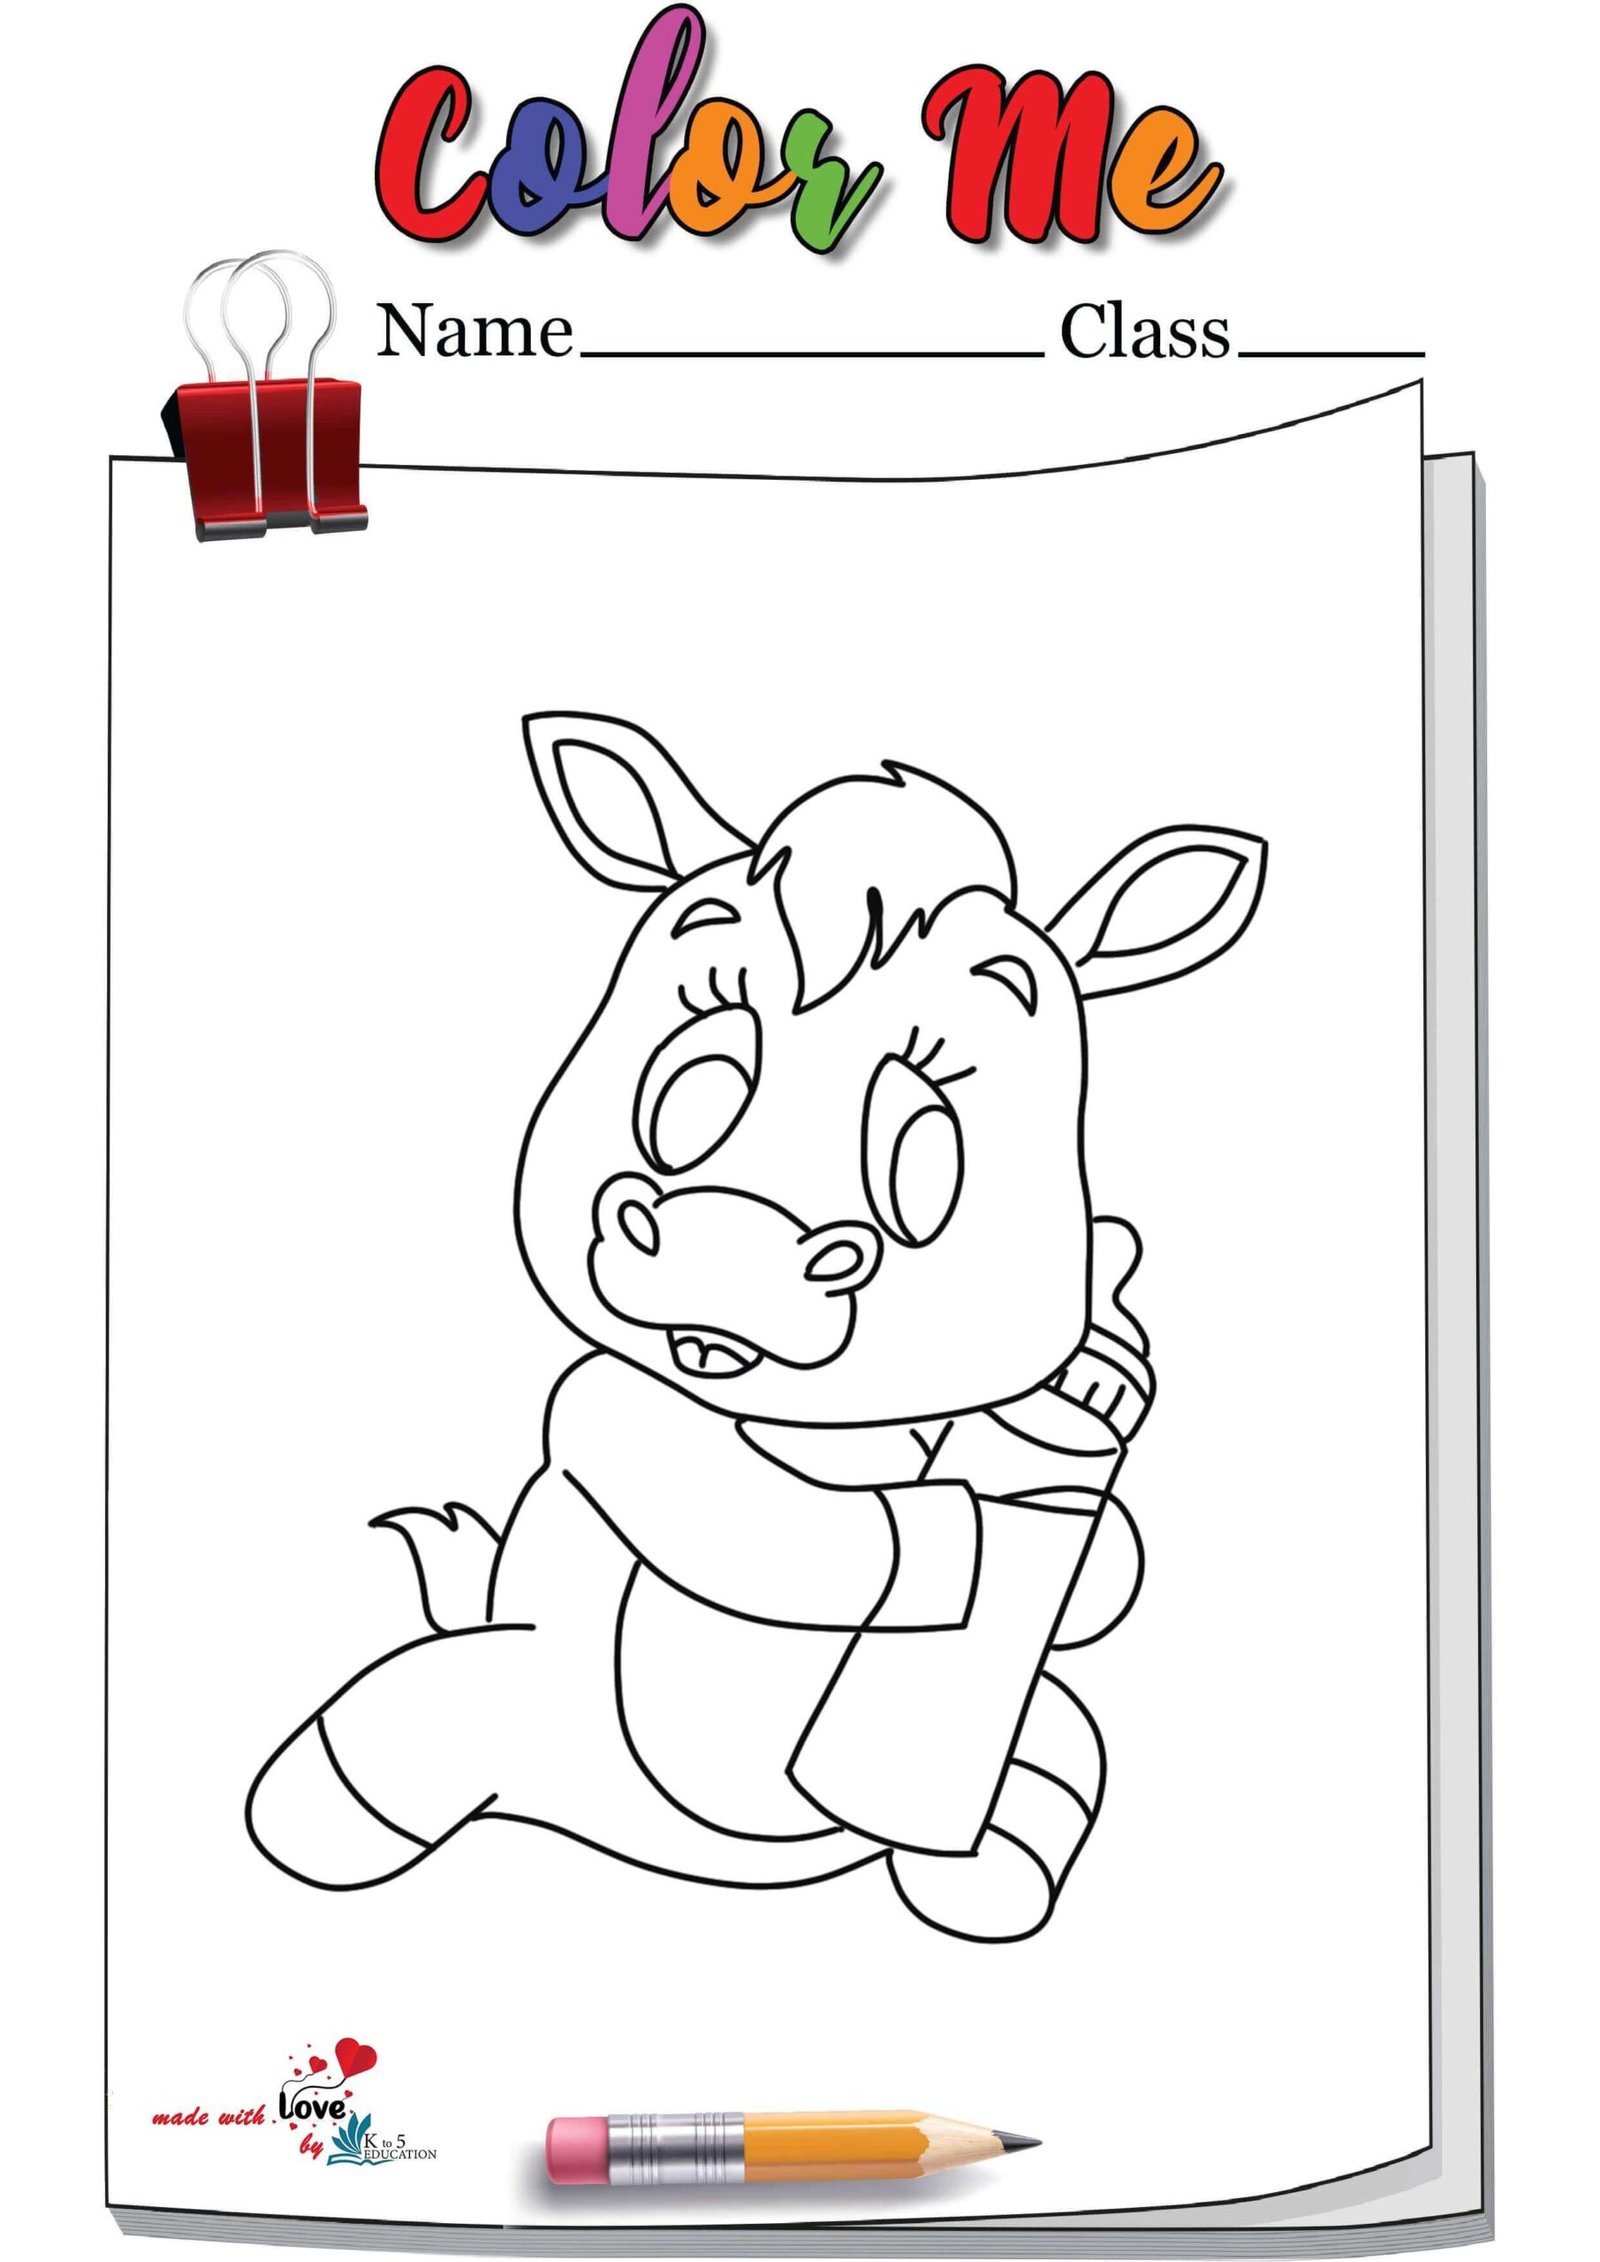 Baby Horse Coloring Page